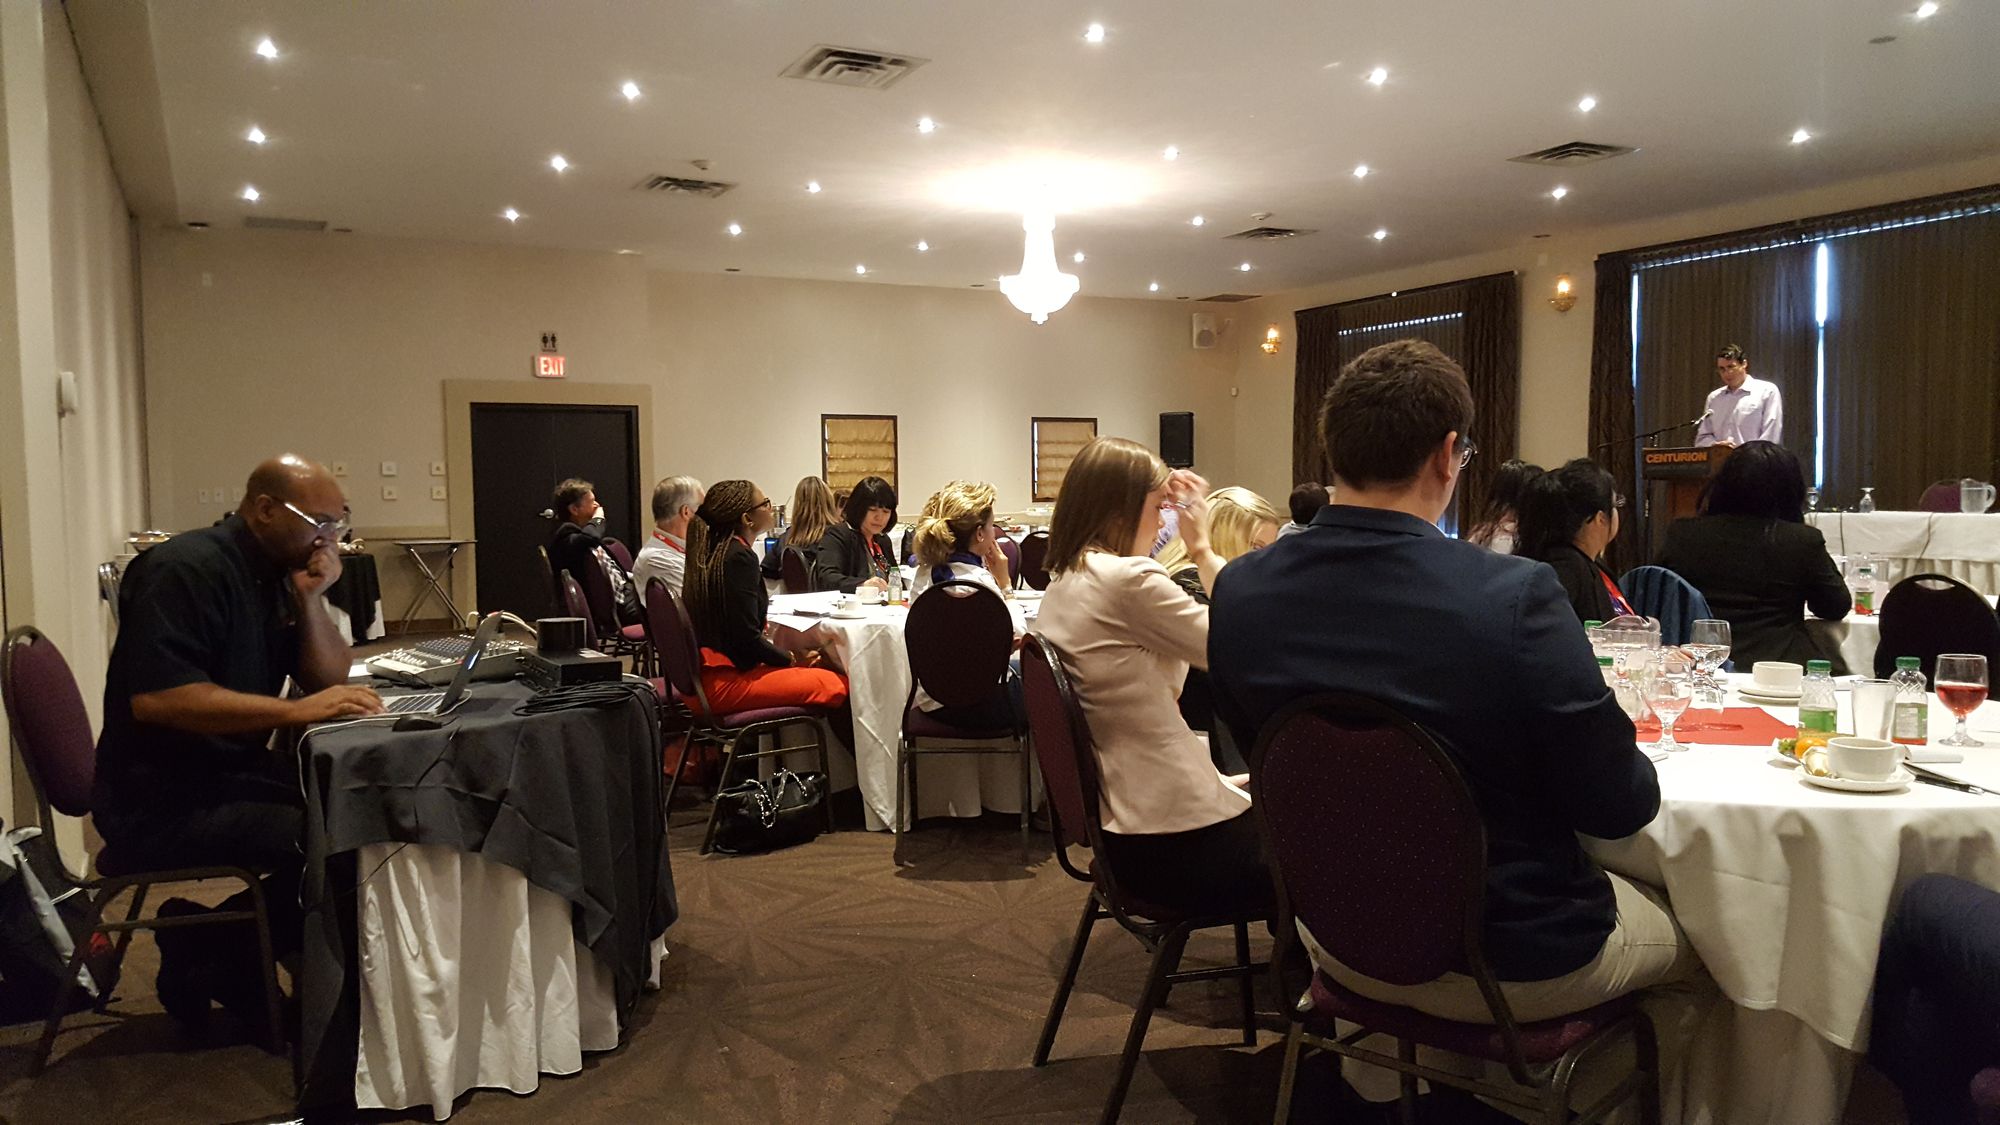 More photos of Ottawa's weekend Paralegal Conference